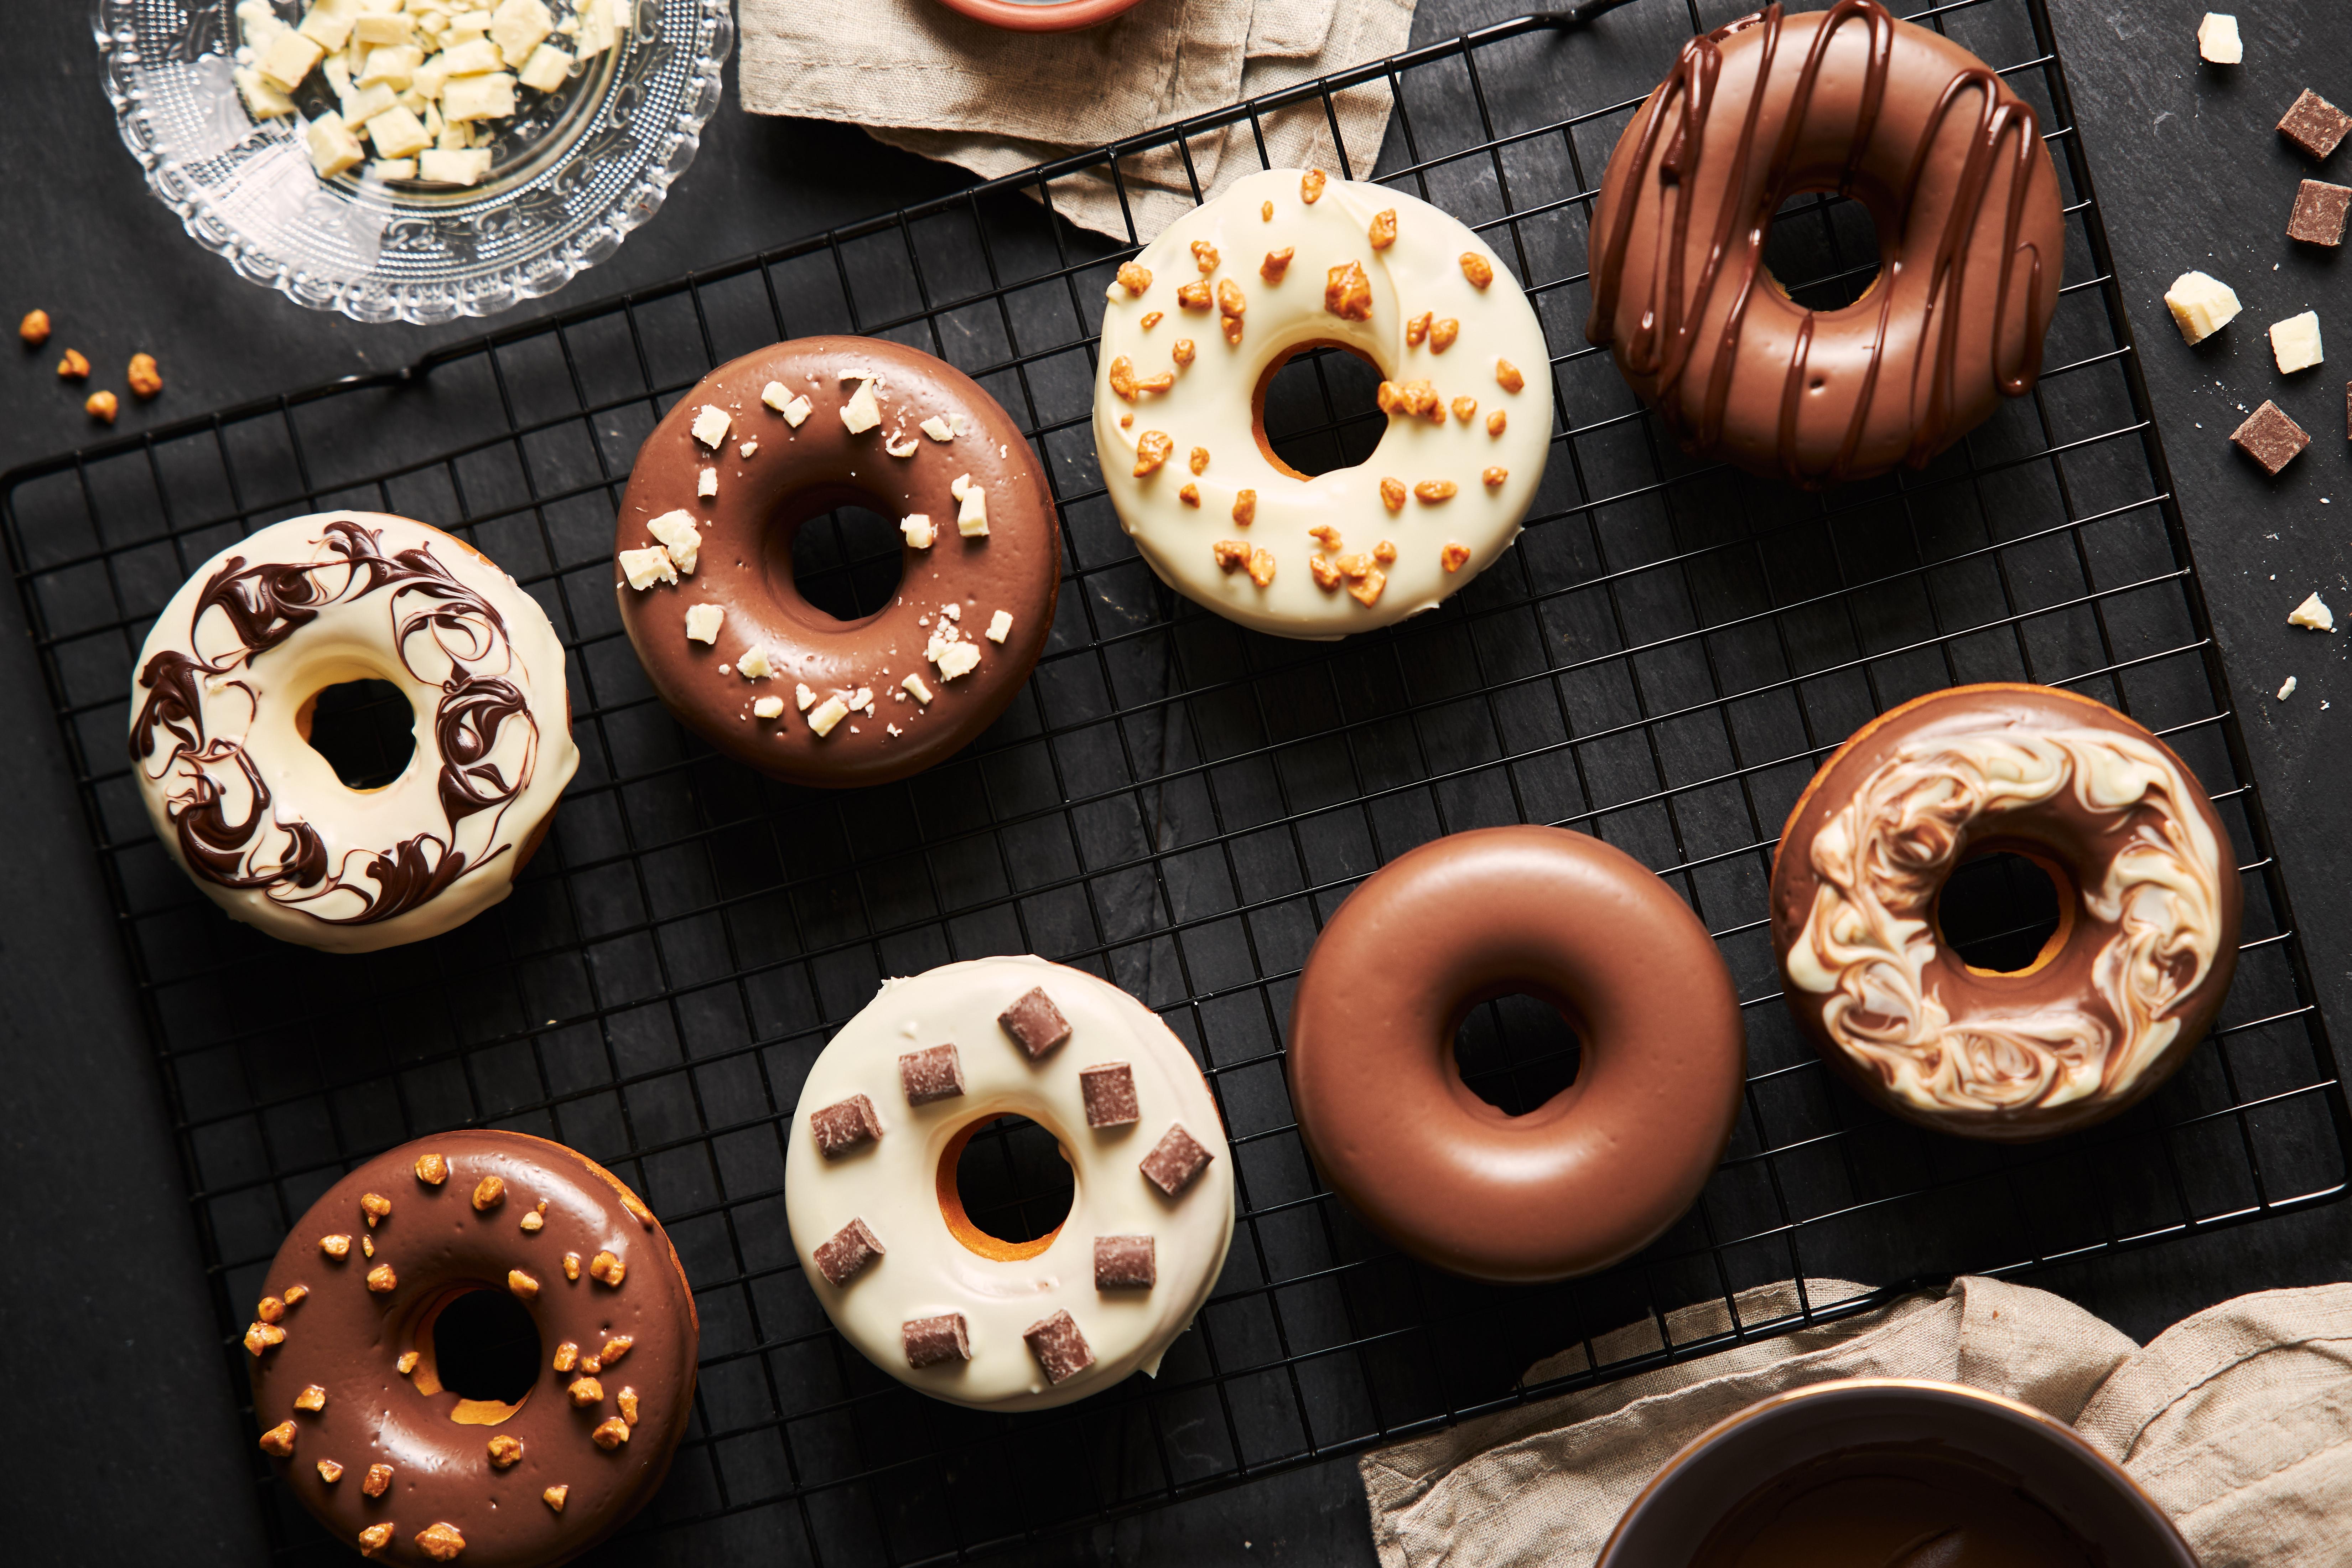 8 Fast-Food Chains That Serve the Best Donuts